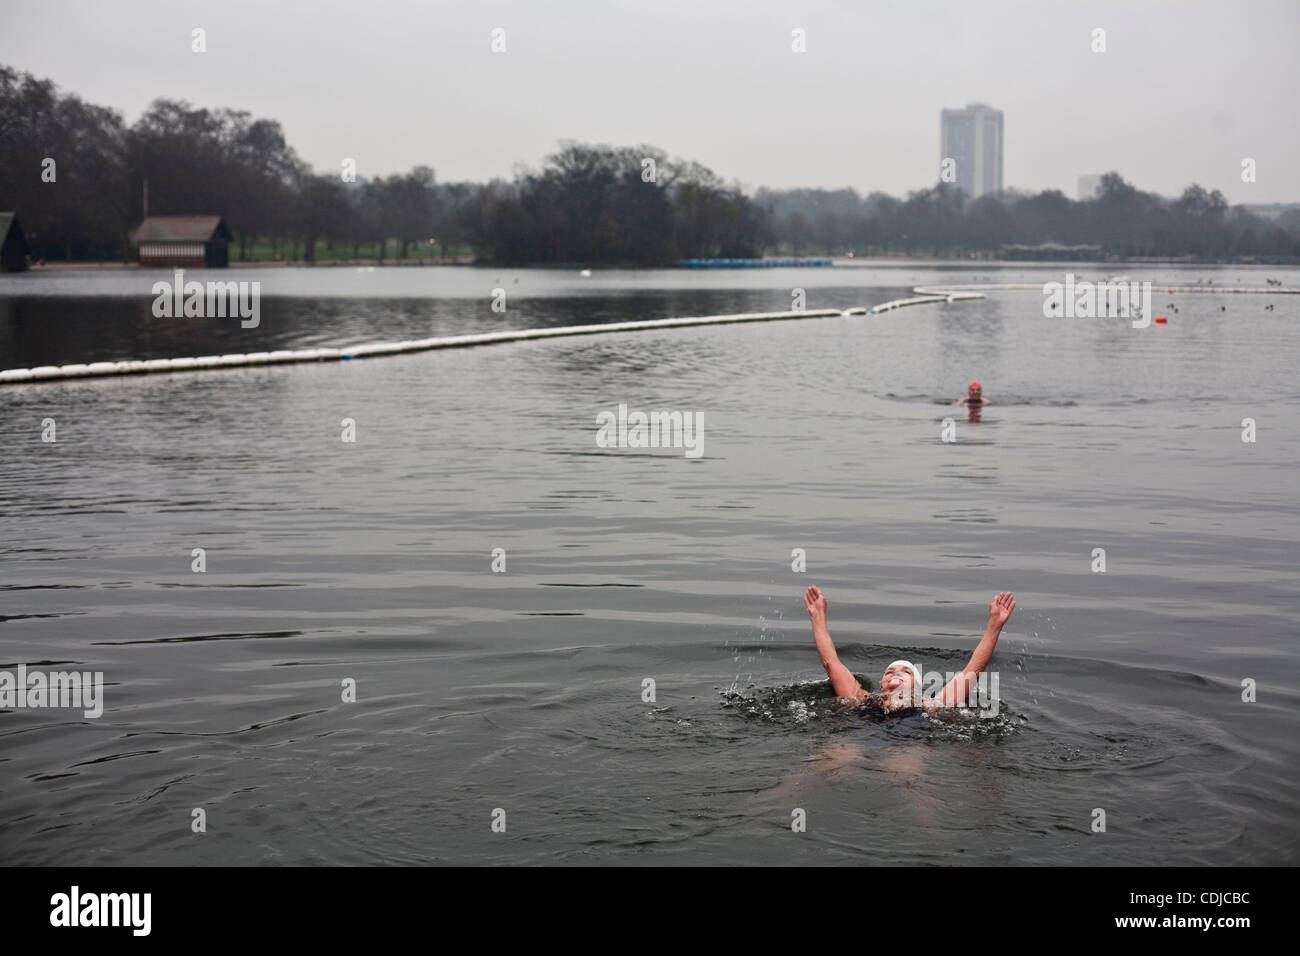 Feb 23, 2011 - London, England, United Kingdom - Annie has been swimming in wintery waters for eleven years. Rain or shine, winter or summer, Serpentine Swimming Club members gather at the Serpentine Lido in Hyde Park all year long. The Serpentine Swimming Club is one of the oldest swimming clubs in Stock Photo